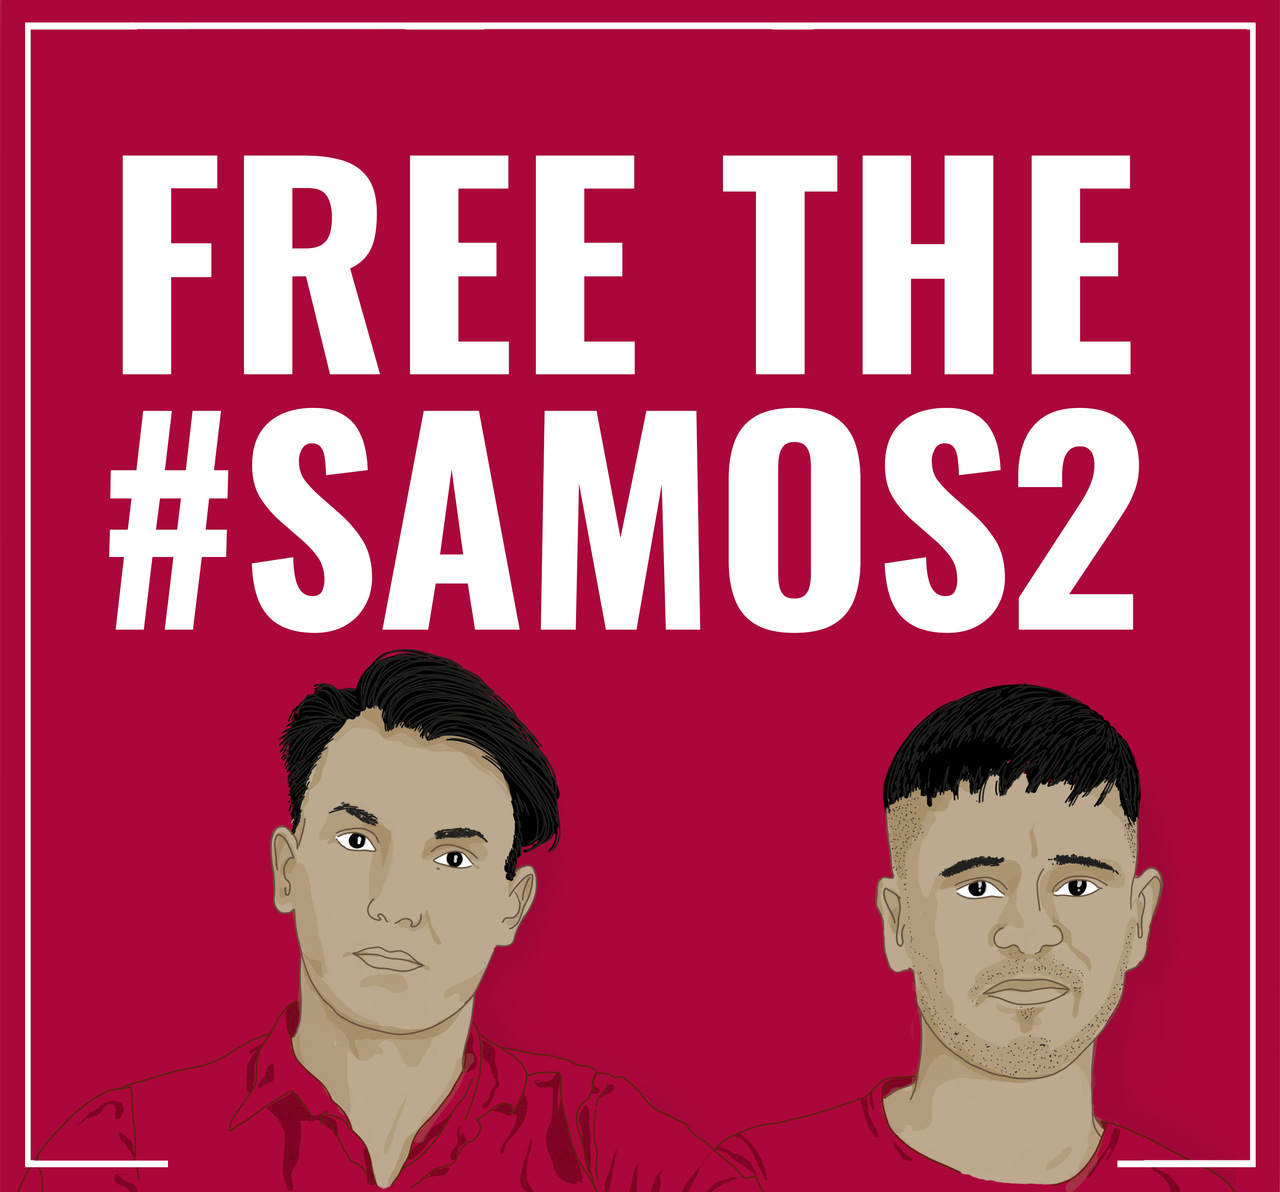 The real crime is the border regime - Free the #Samos2